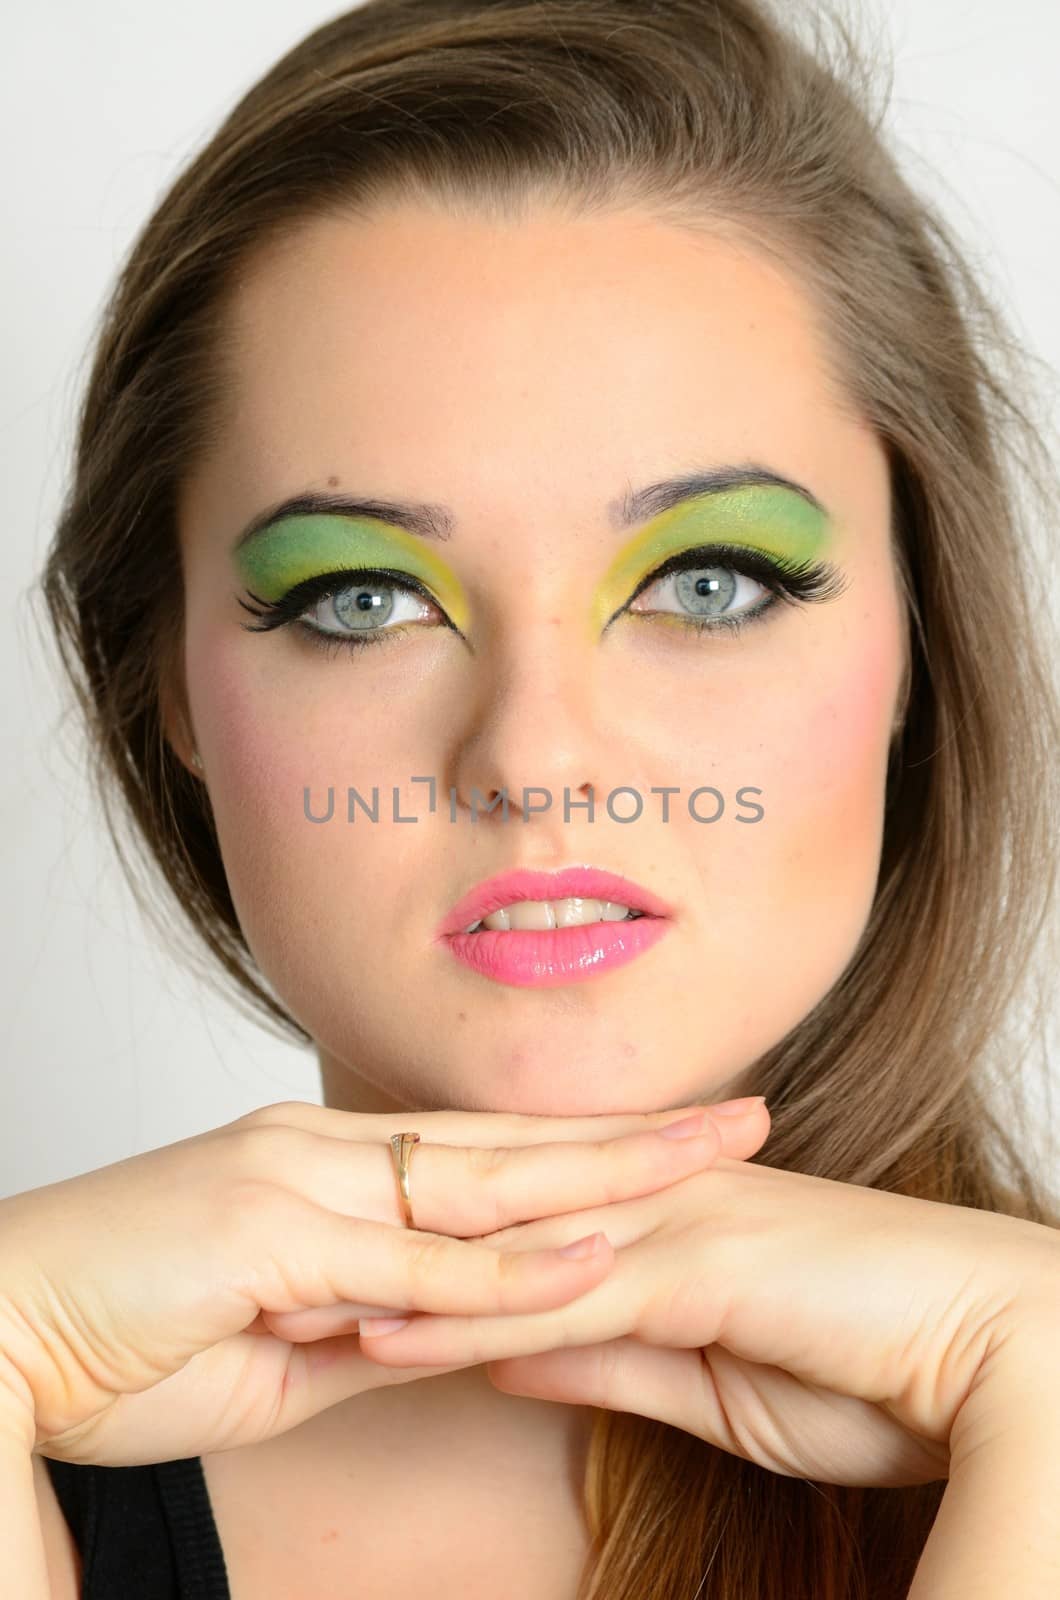 Young female model with colorful makeup. Face closeup portrait photo of teenager. 